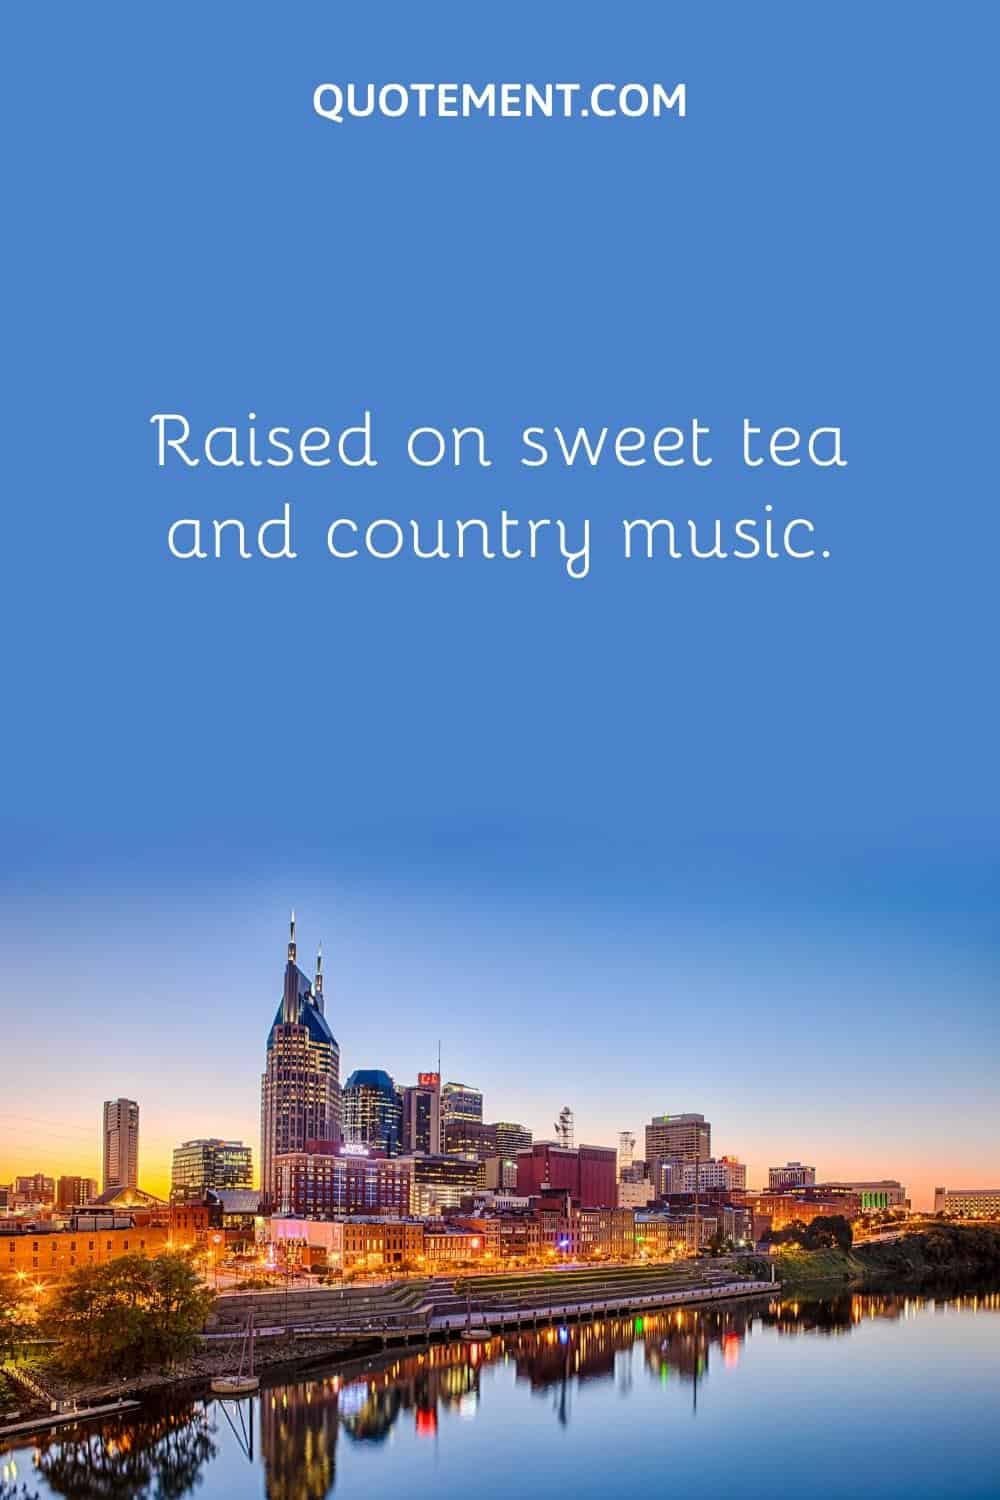 Raised on sweet tea and country music.